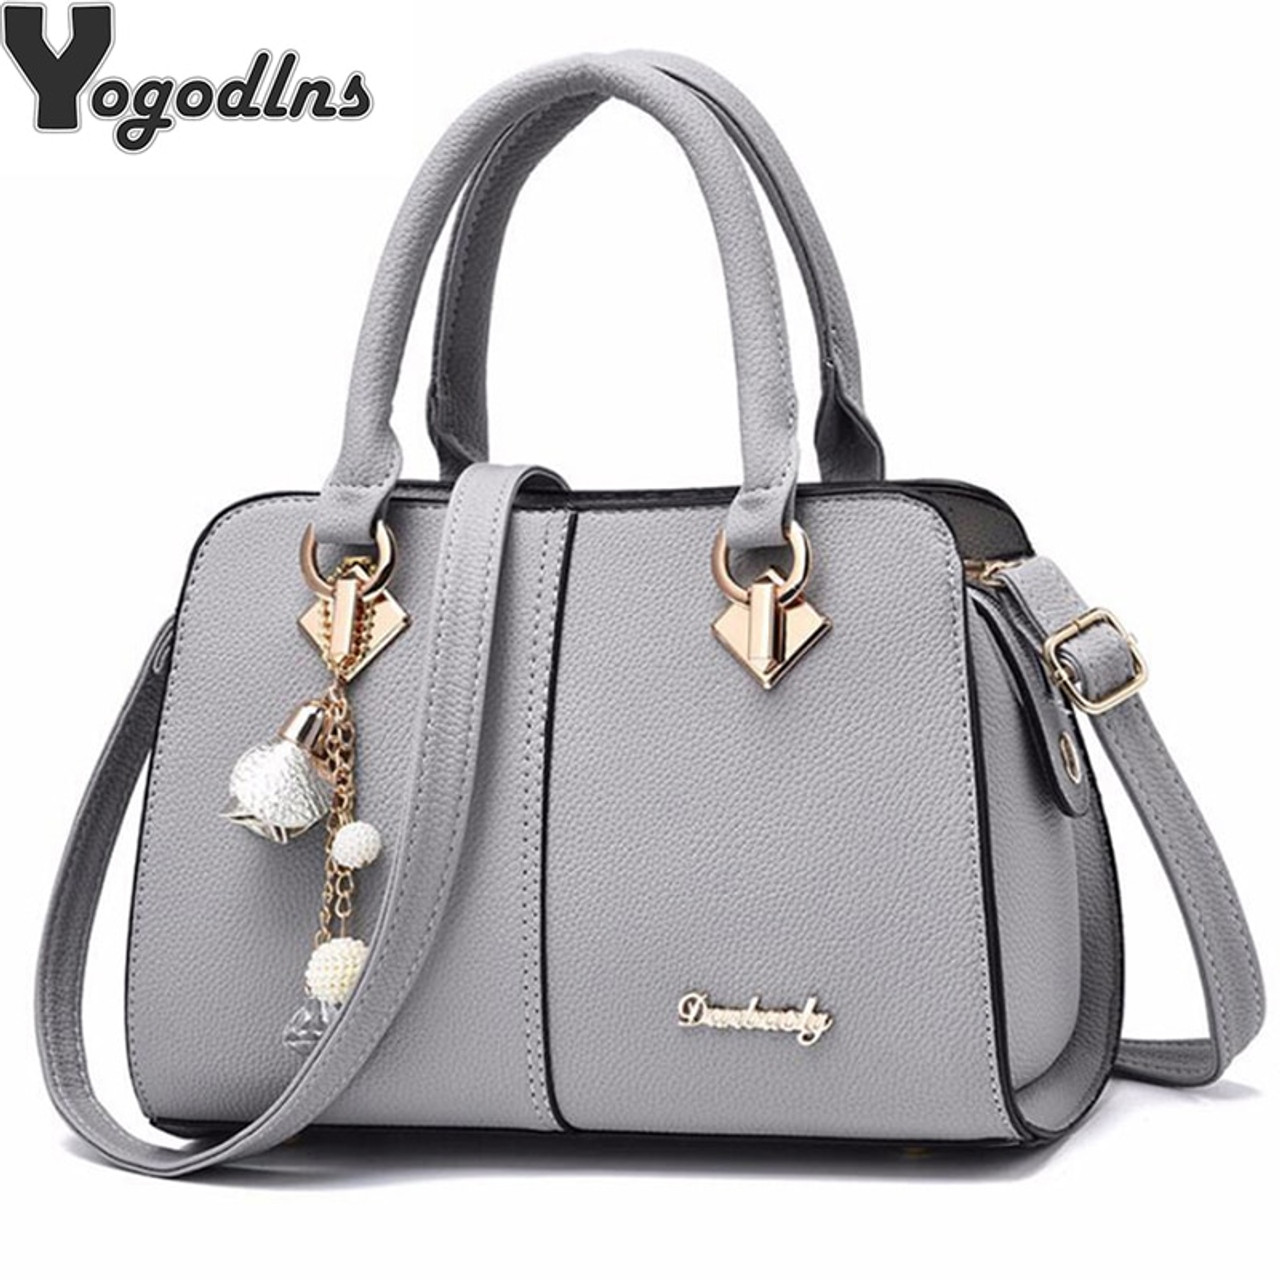 Buy AP Product Handbags for Women, Shoulder Bag, Top Handle Satchel Purse  for Daily Work Travel, Faux Leather Handbags, Snake Print (Grey/Black) at  Amazon.in